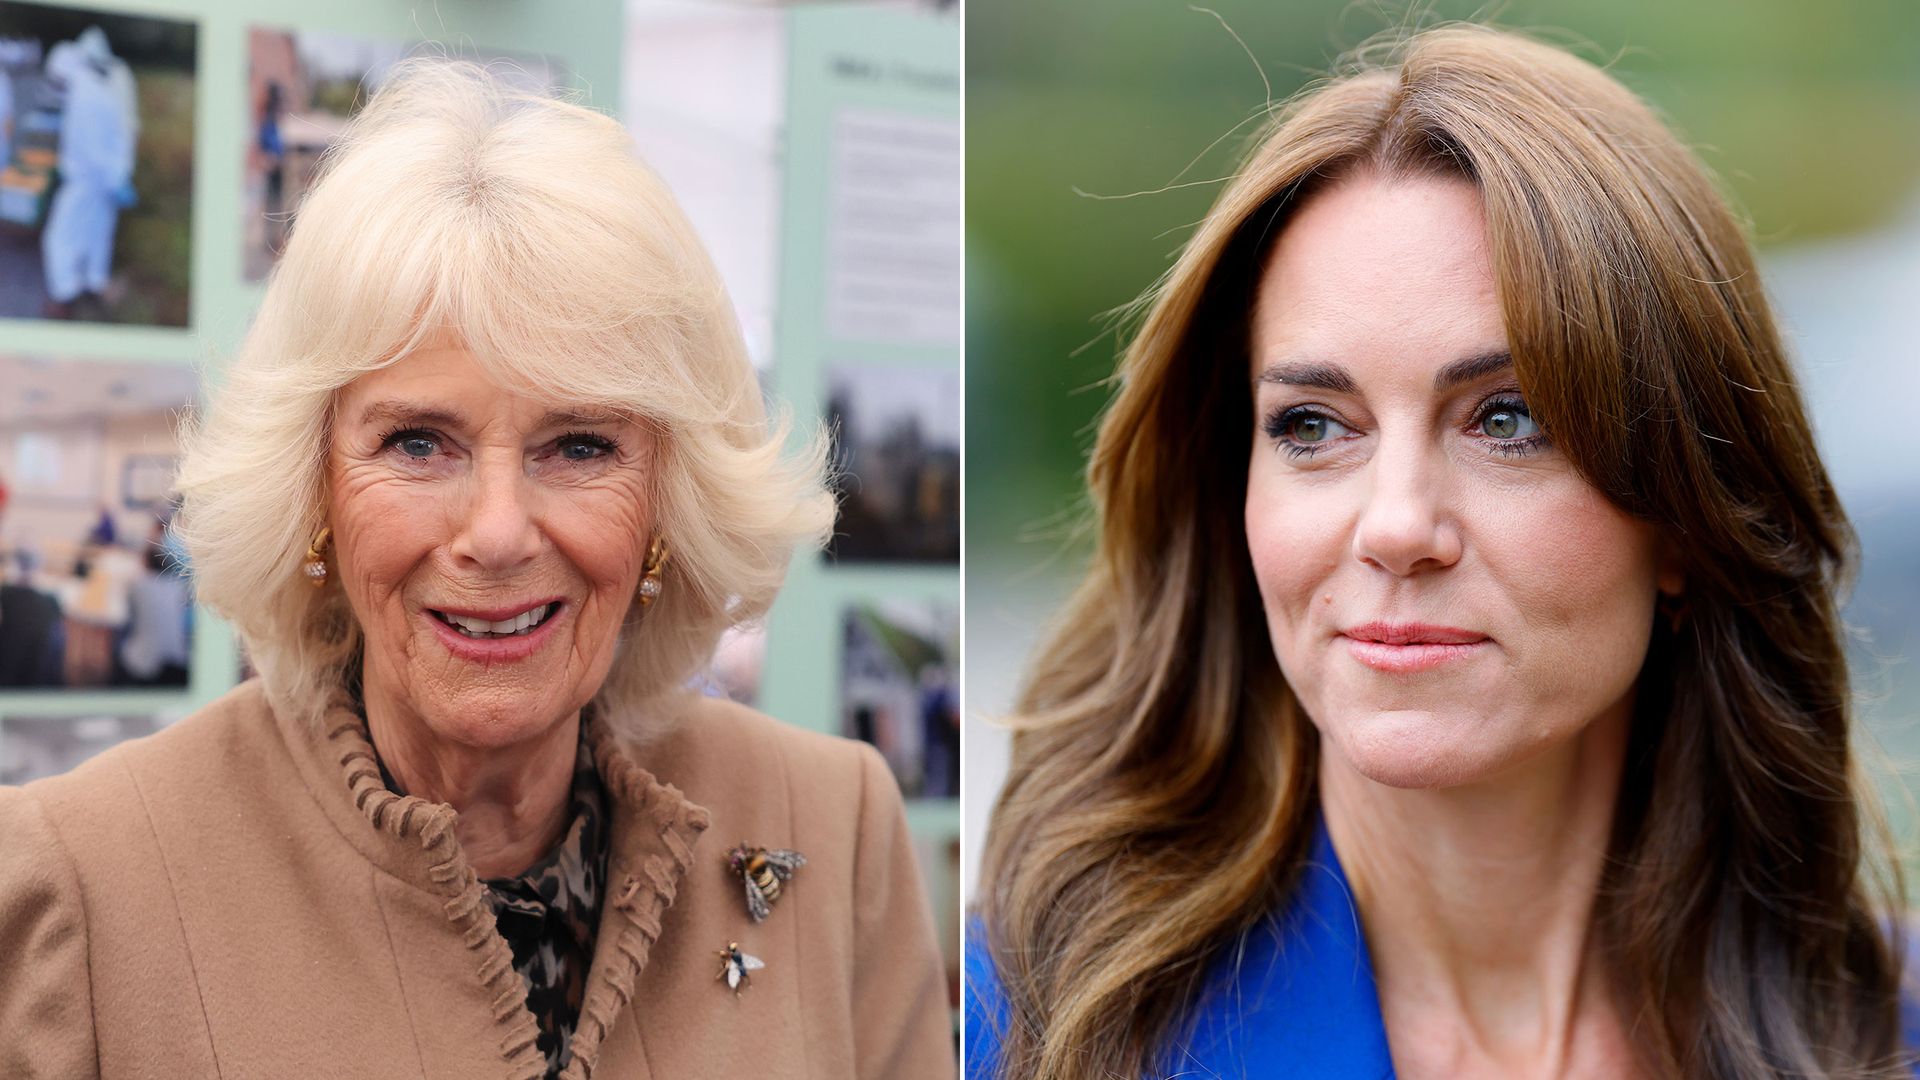 Queen Camilla and Kate Middleton